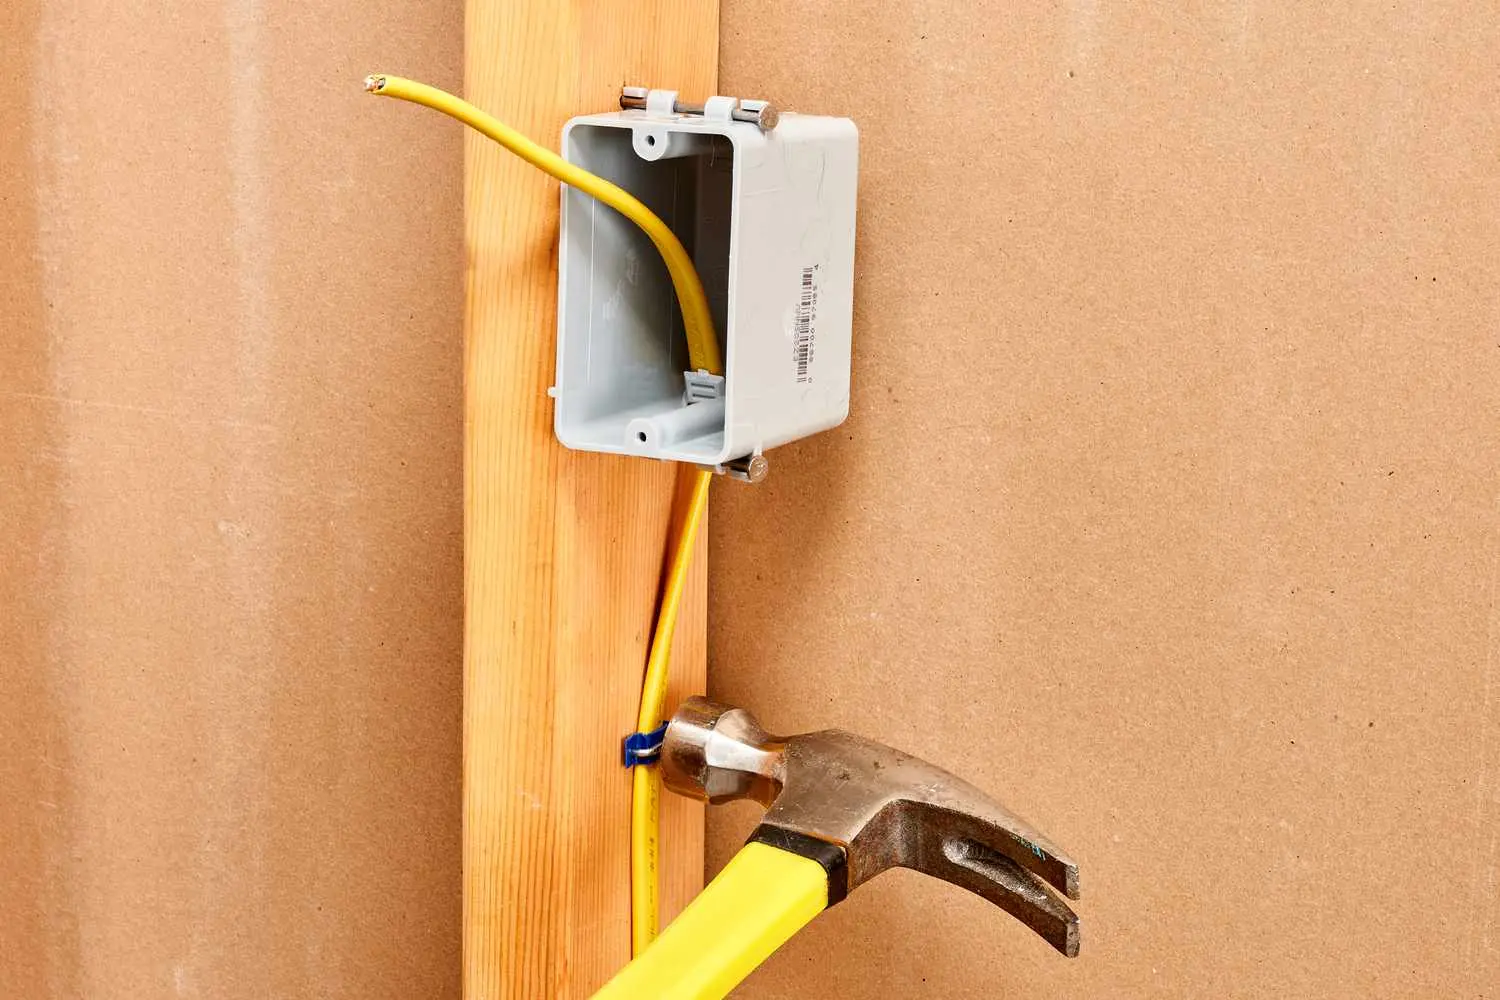 a hammer used for securing cables